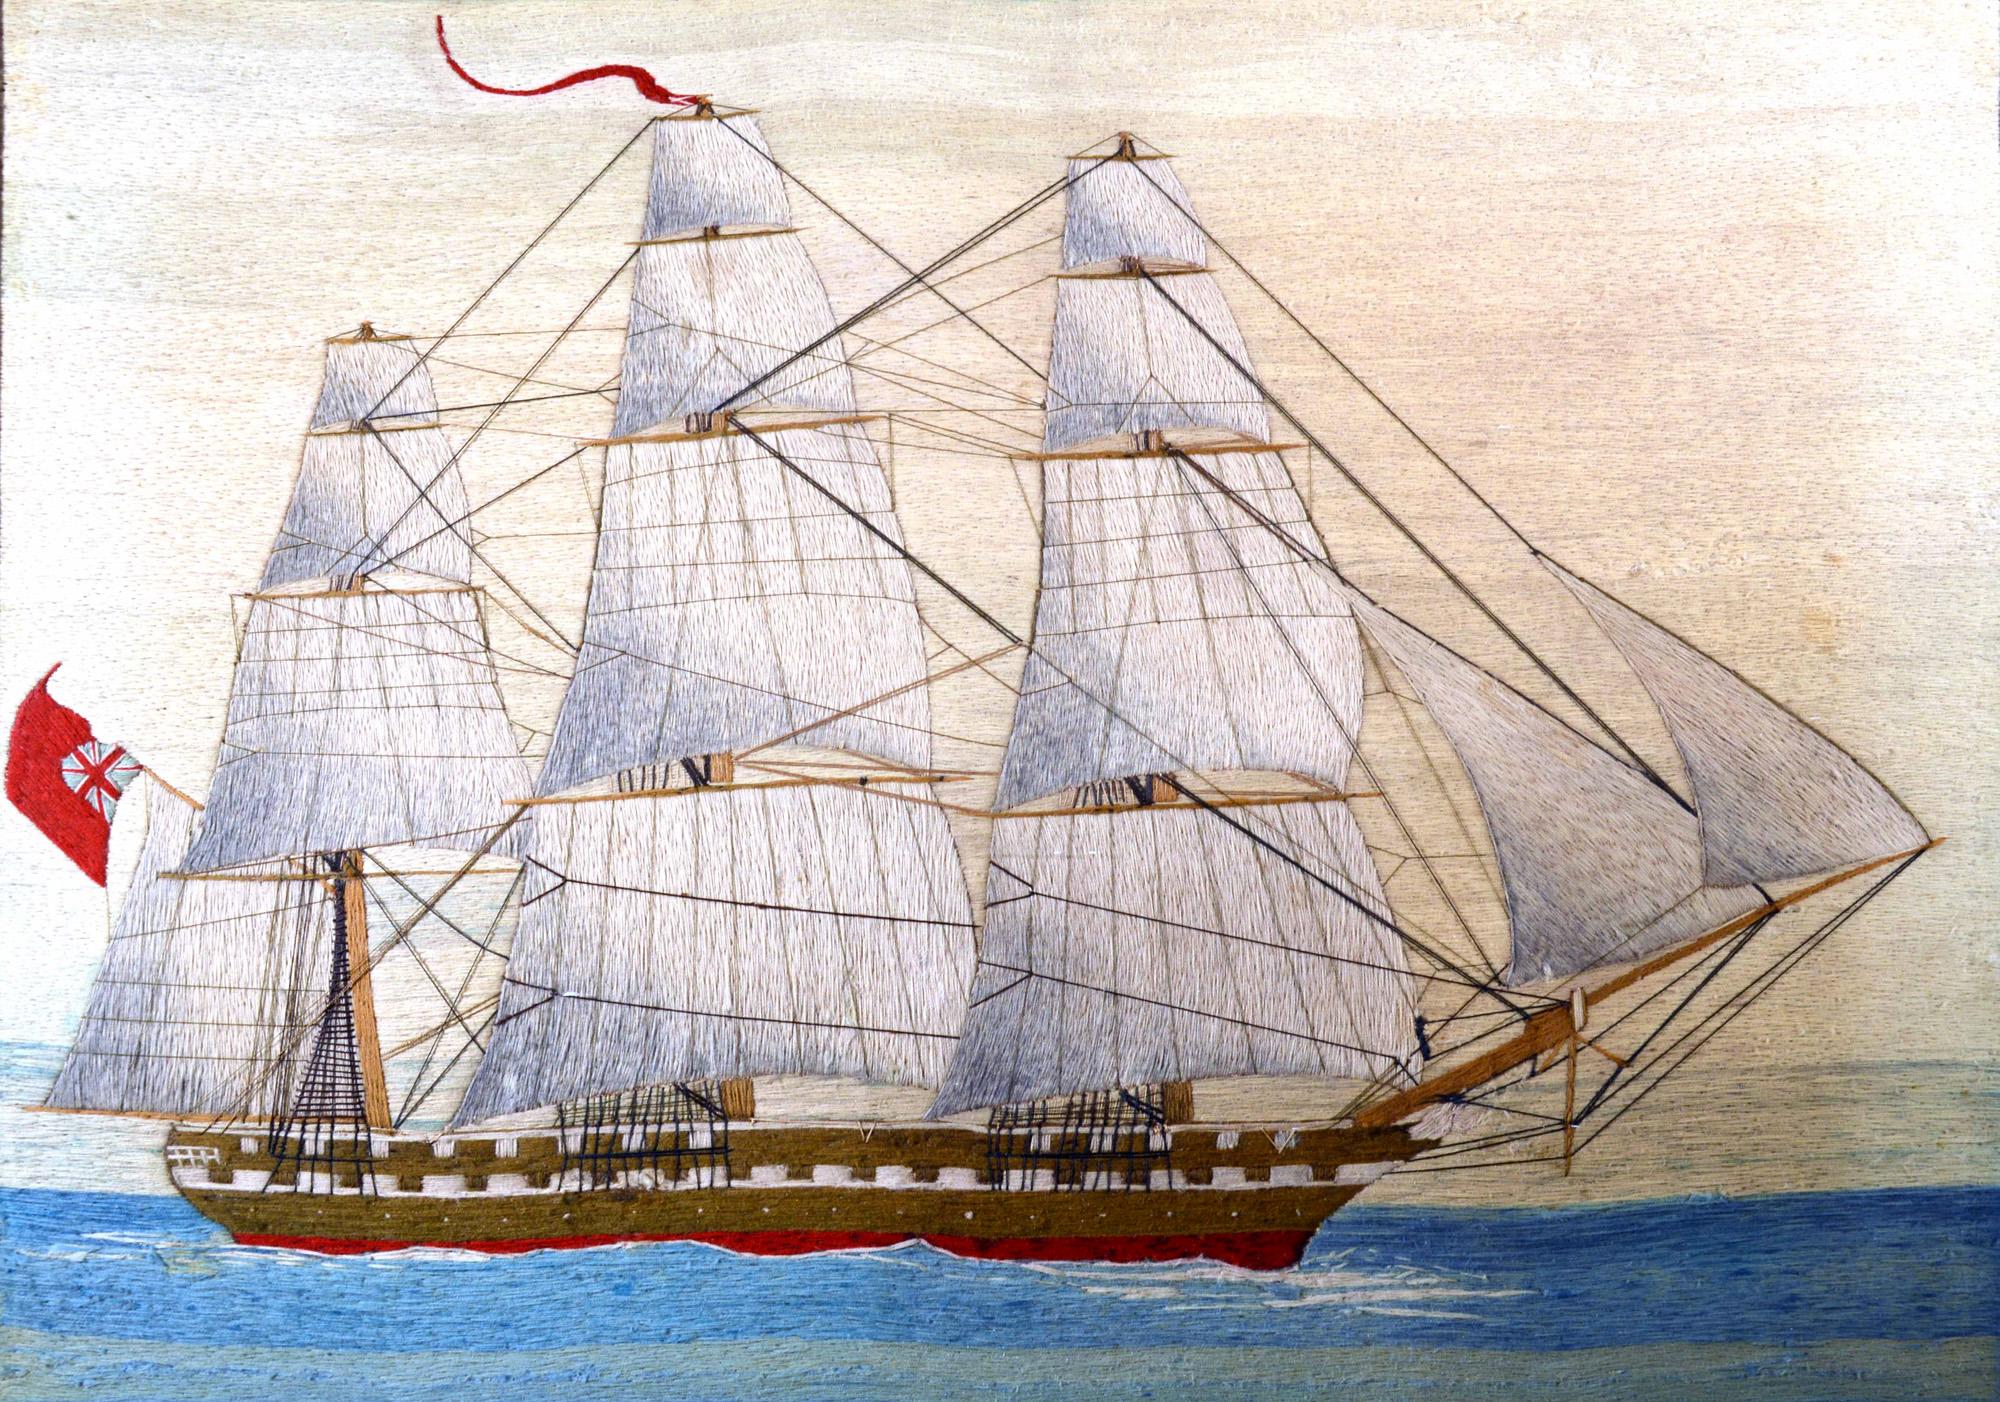 British Sailor's large woolwork of a royal navy ship under full sail,
circa 1875

The sailor's woolie or woolwork depicts a starboard side view of a three-masted square-rigged Royal Navy ship under full sail flying the Red Ensign and a fluttering